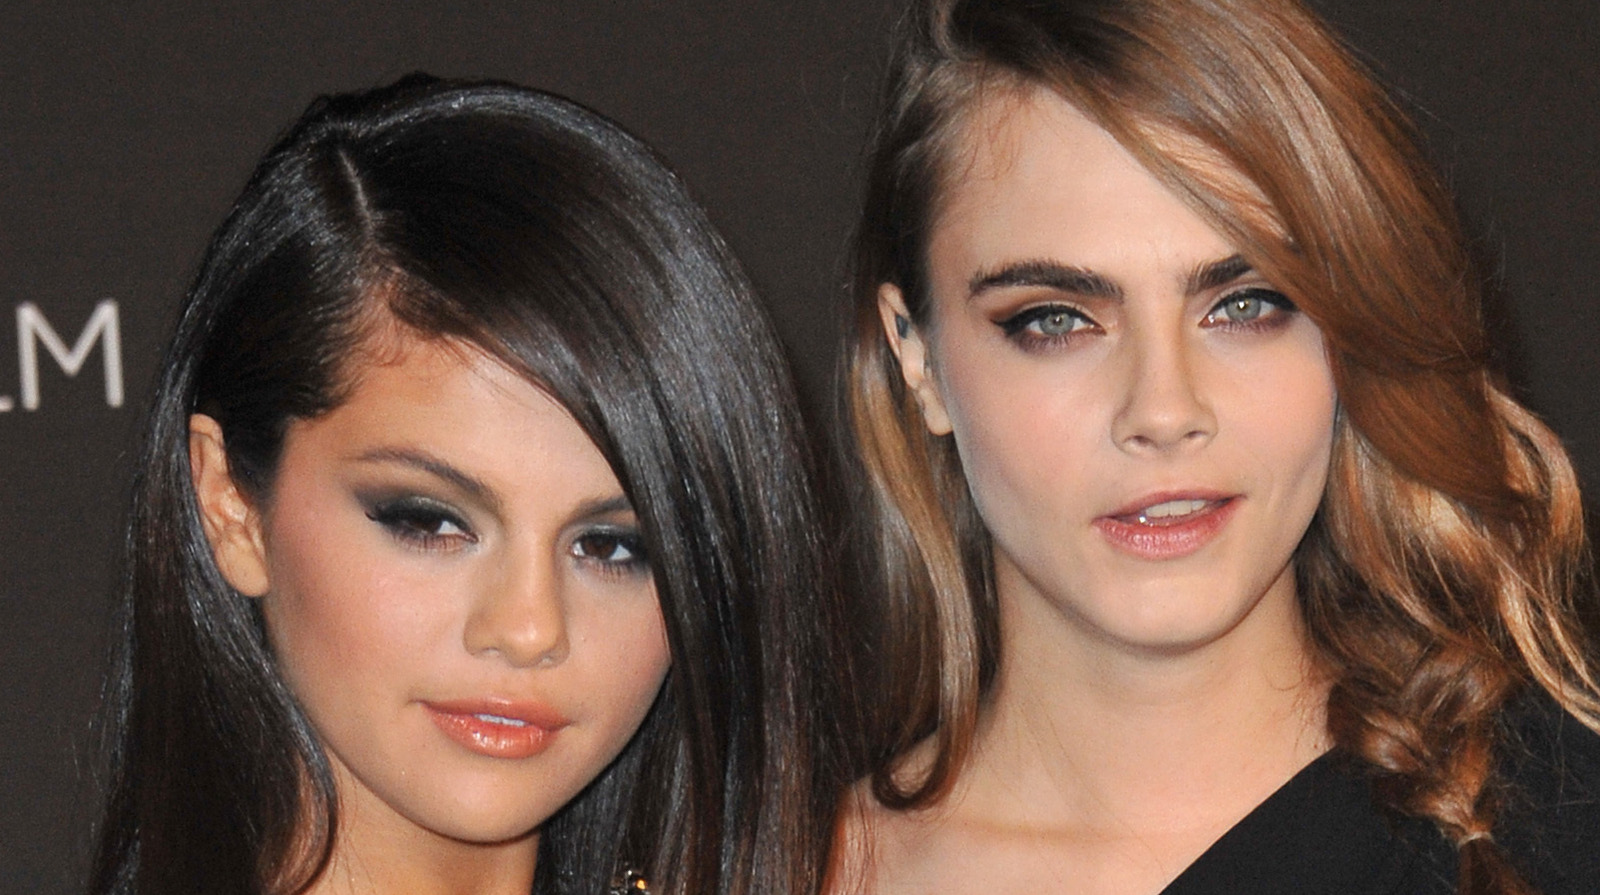 The Truth About Cara Delevingne And Selena Gomez's Friendship - The List